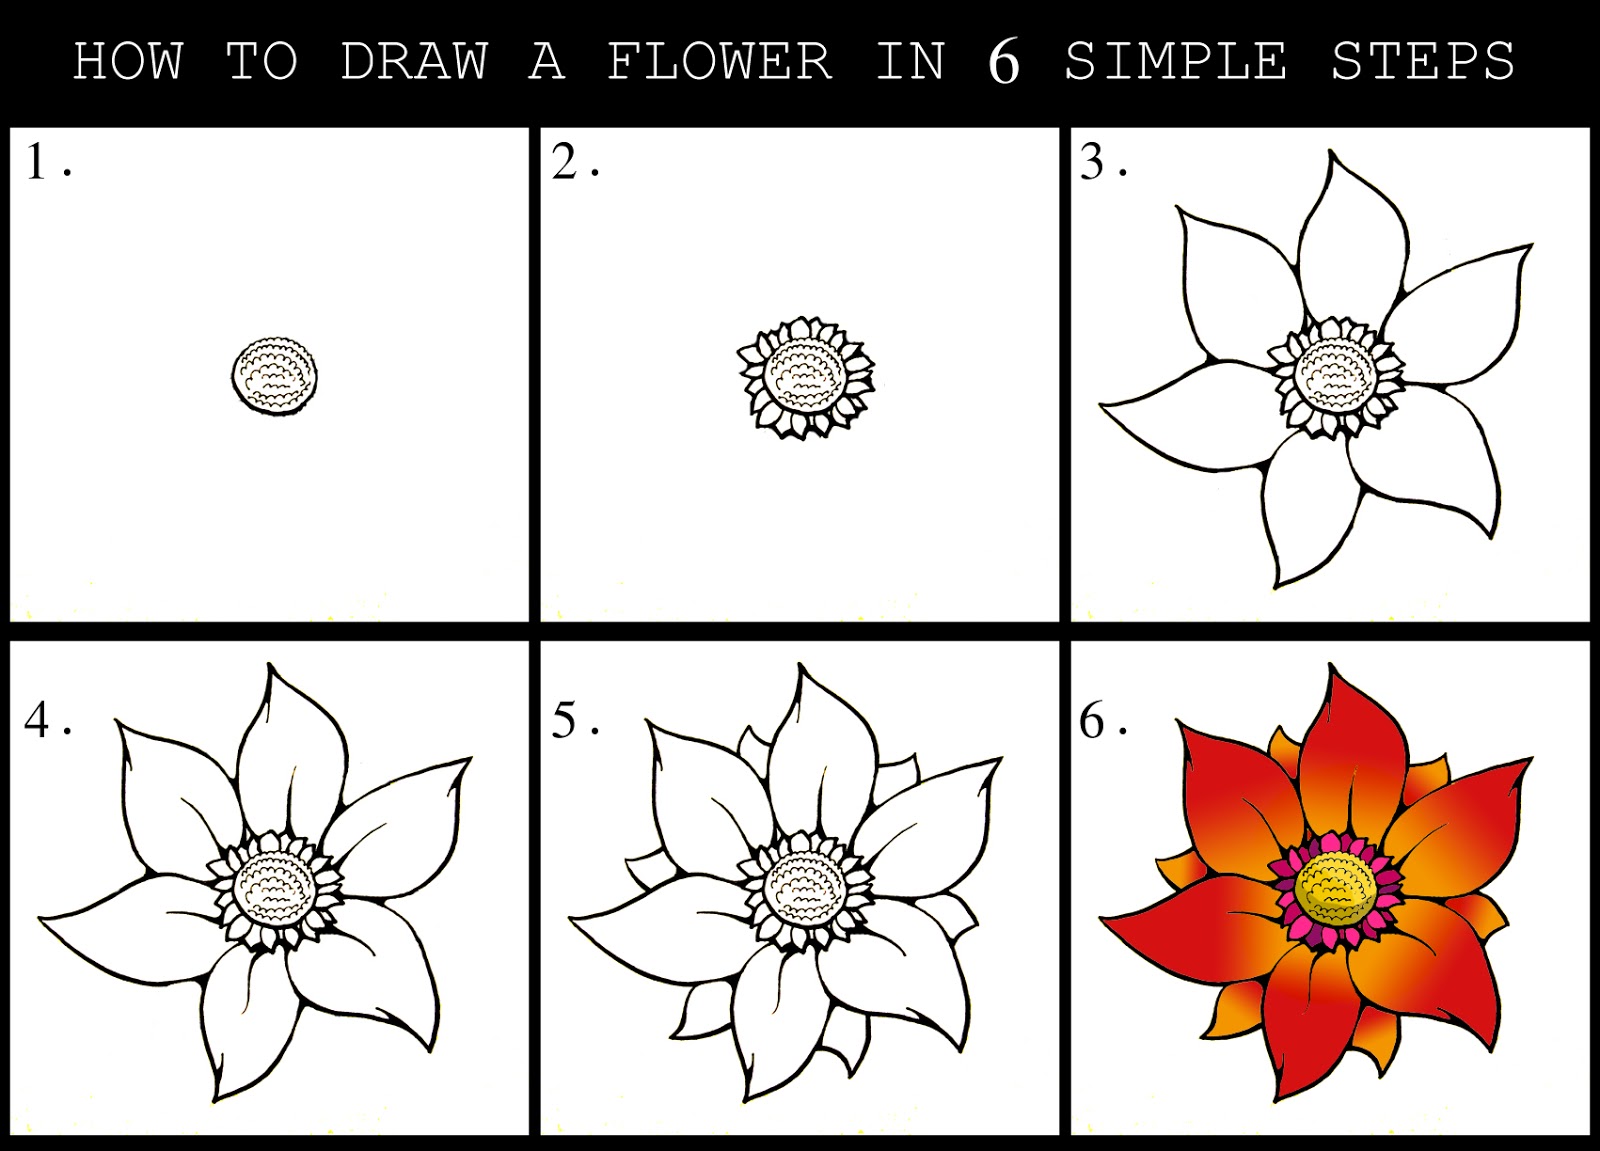 DARYL HOBSON ARTWORK: How To Draw A Flower: Step By Step Guide